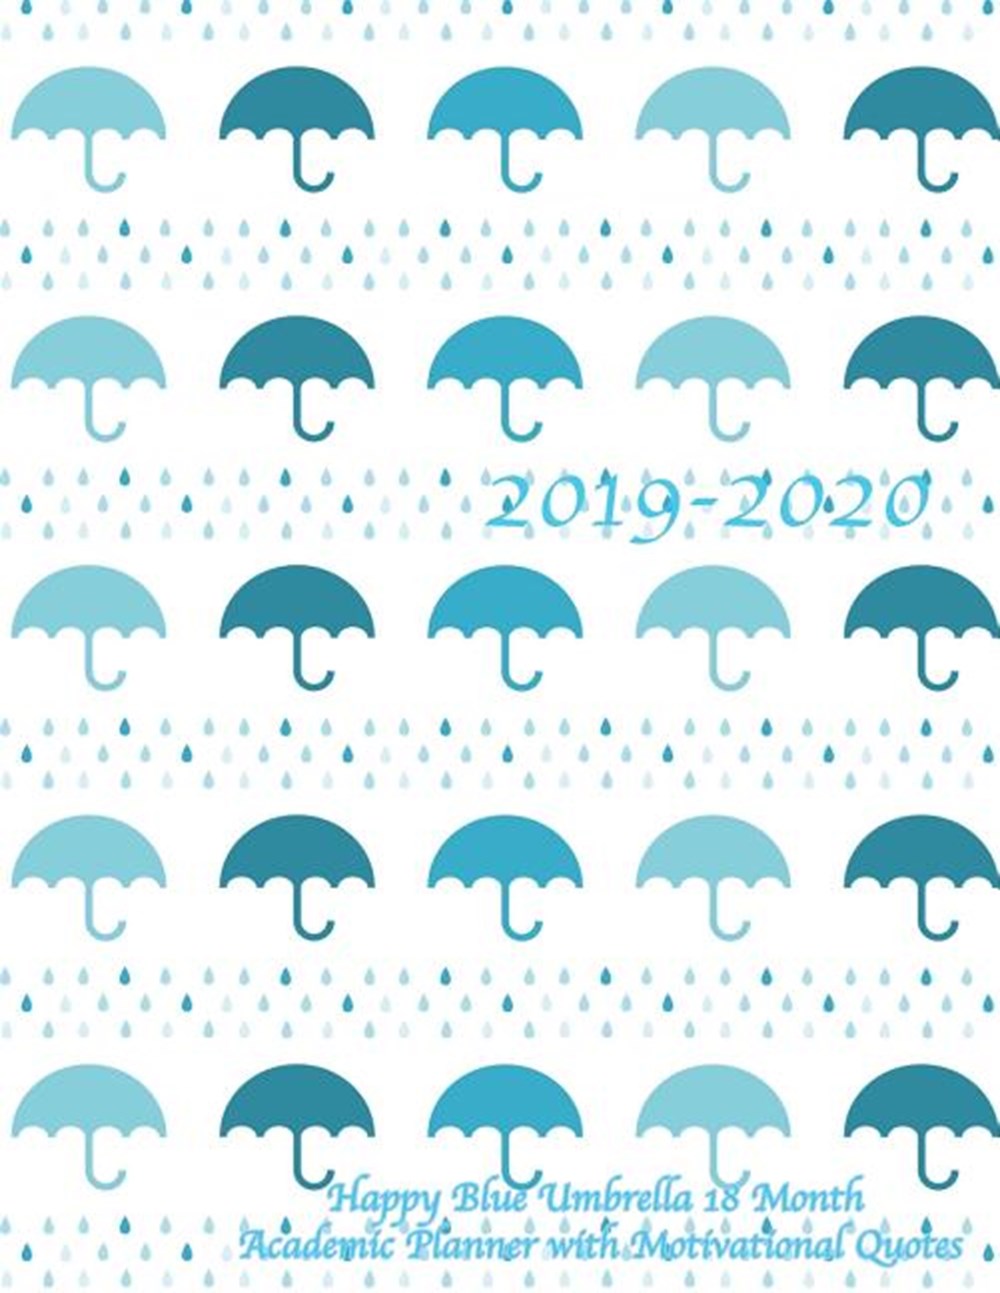 2019-2020 Happy Blue Umbrella 18 Month Academic Planner with Motivational Quotes July 2019 To Decemb